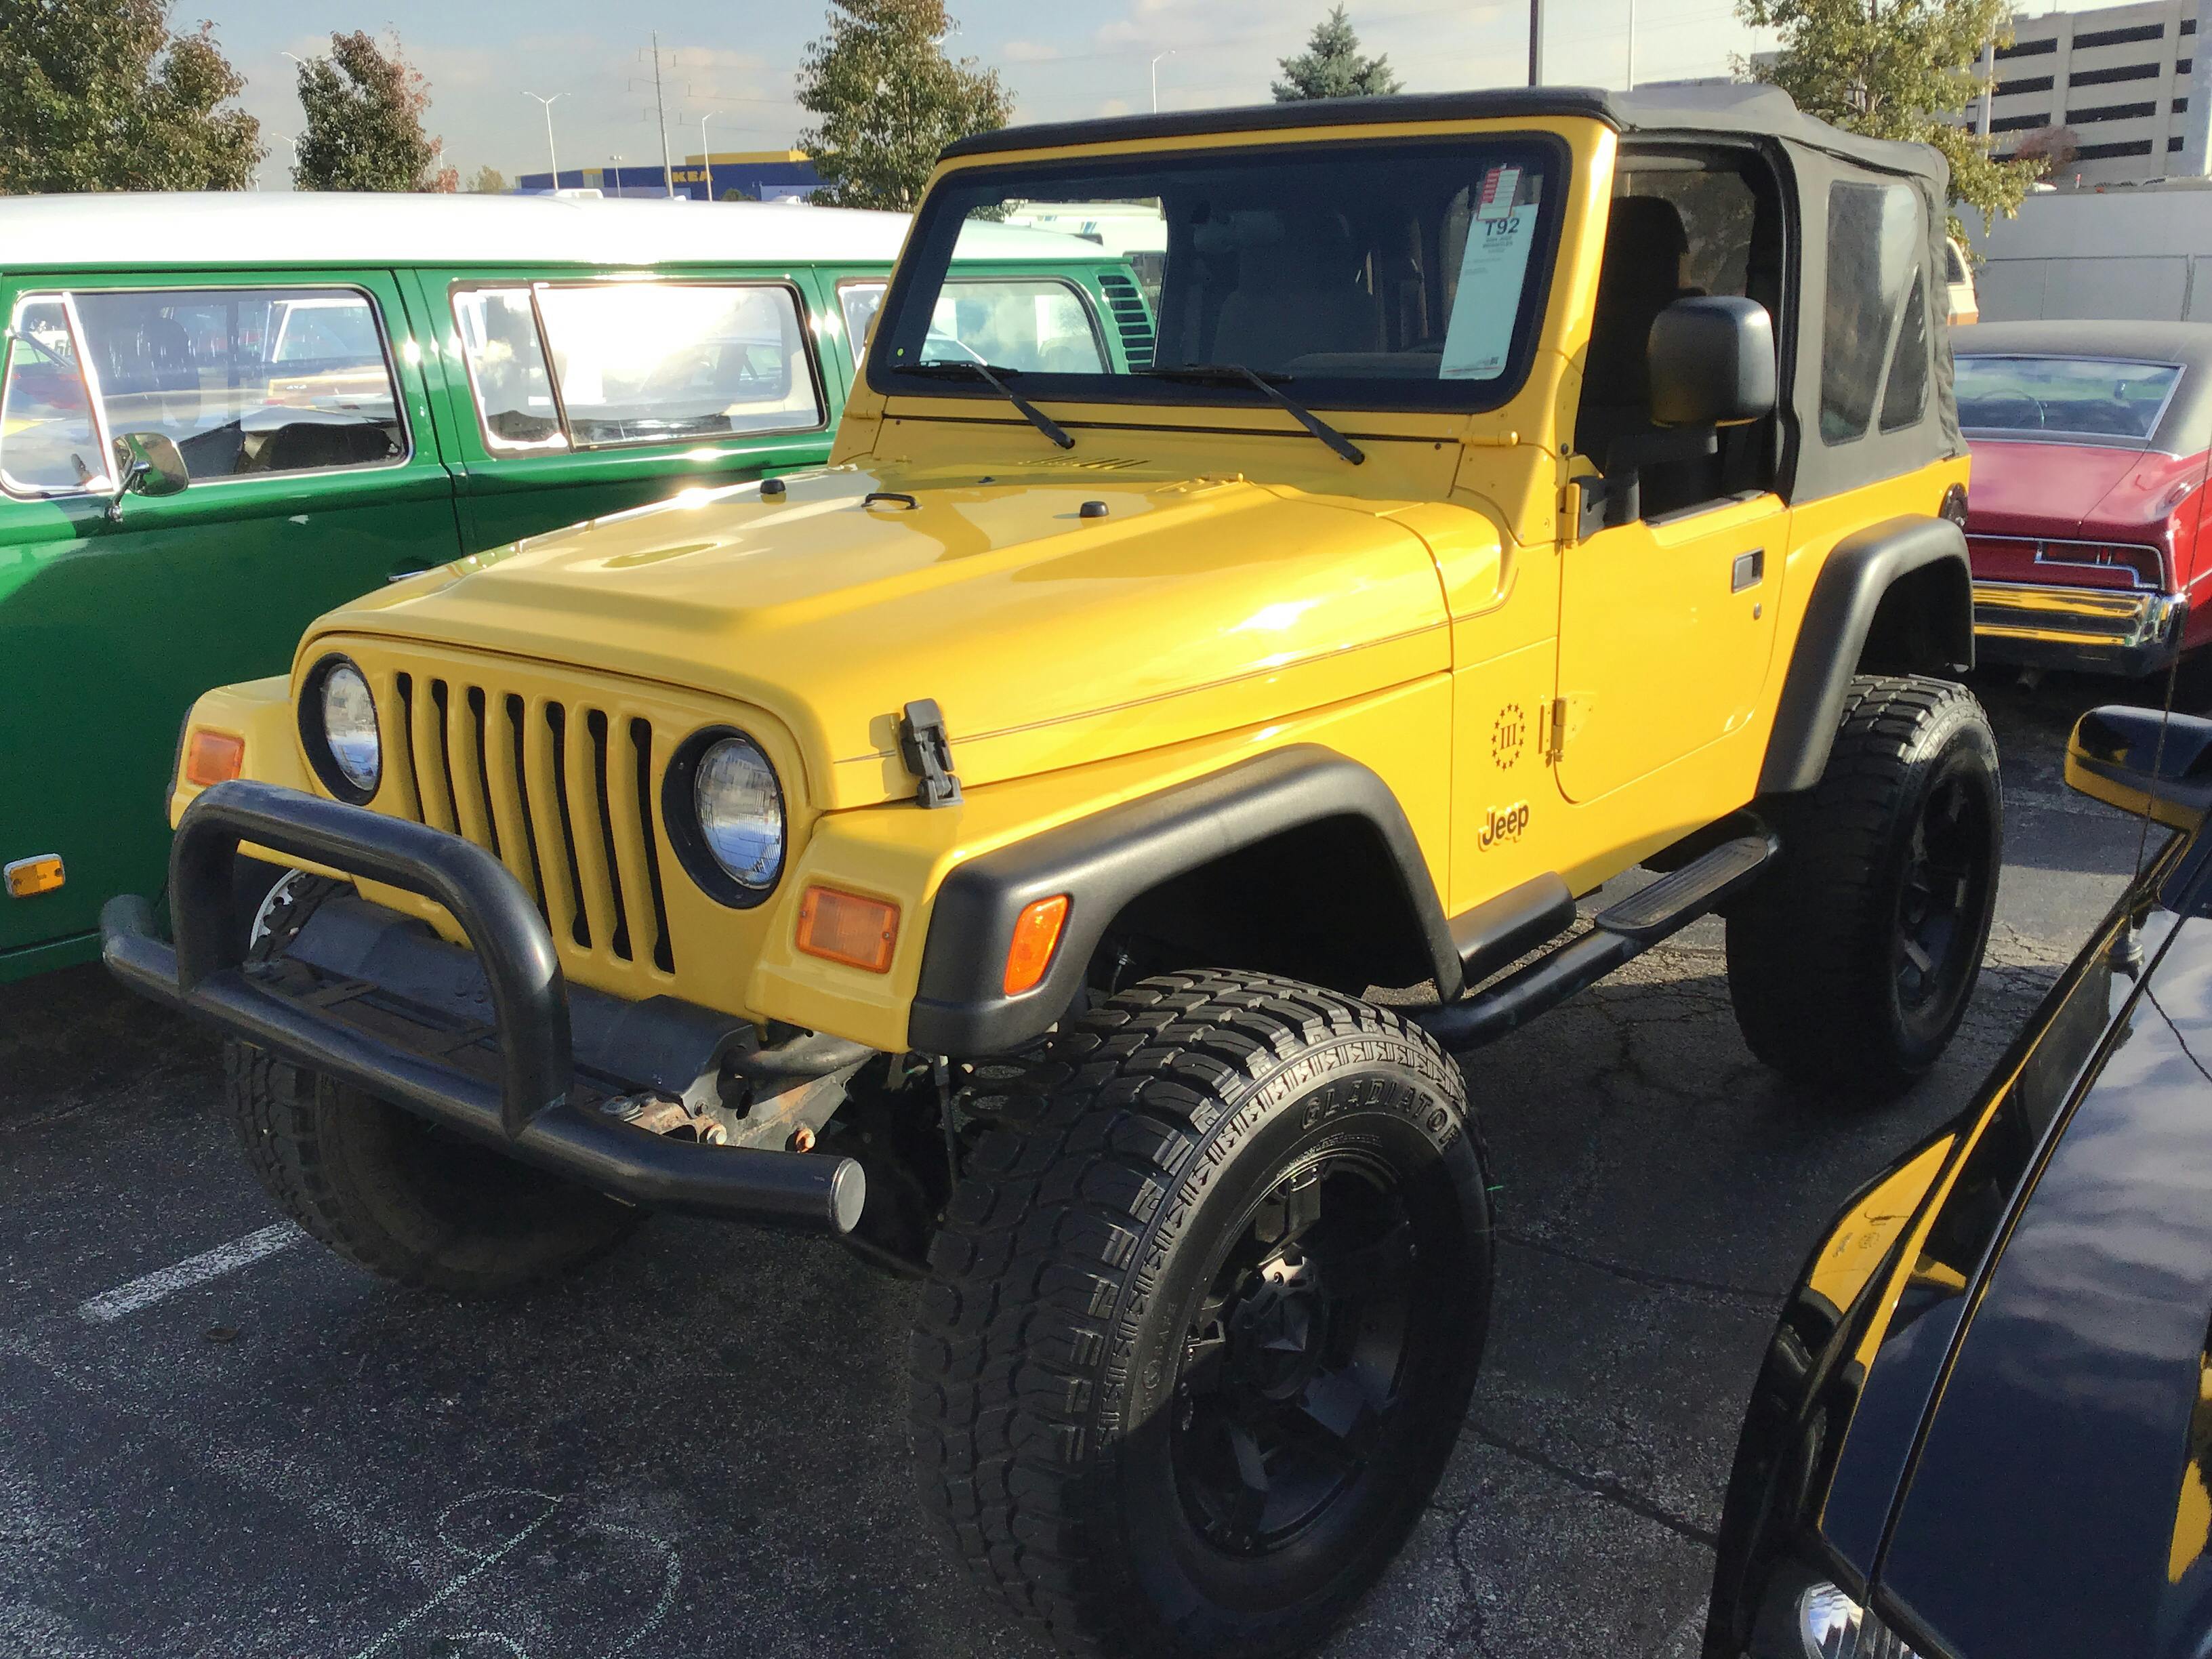 2001 Jeep Wrangler SE | Hagerty Valuation Tools